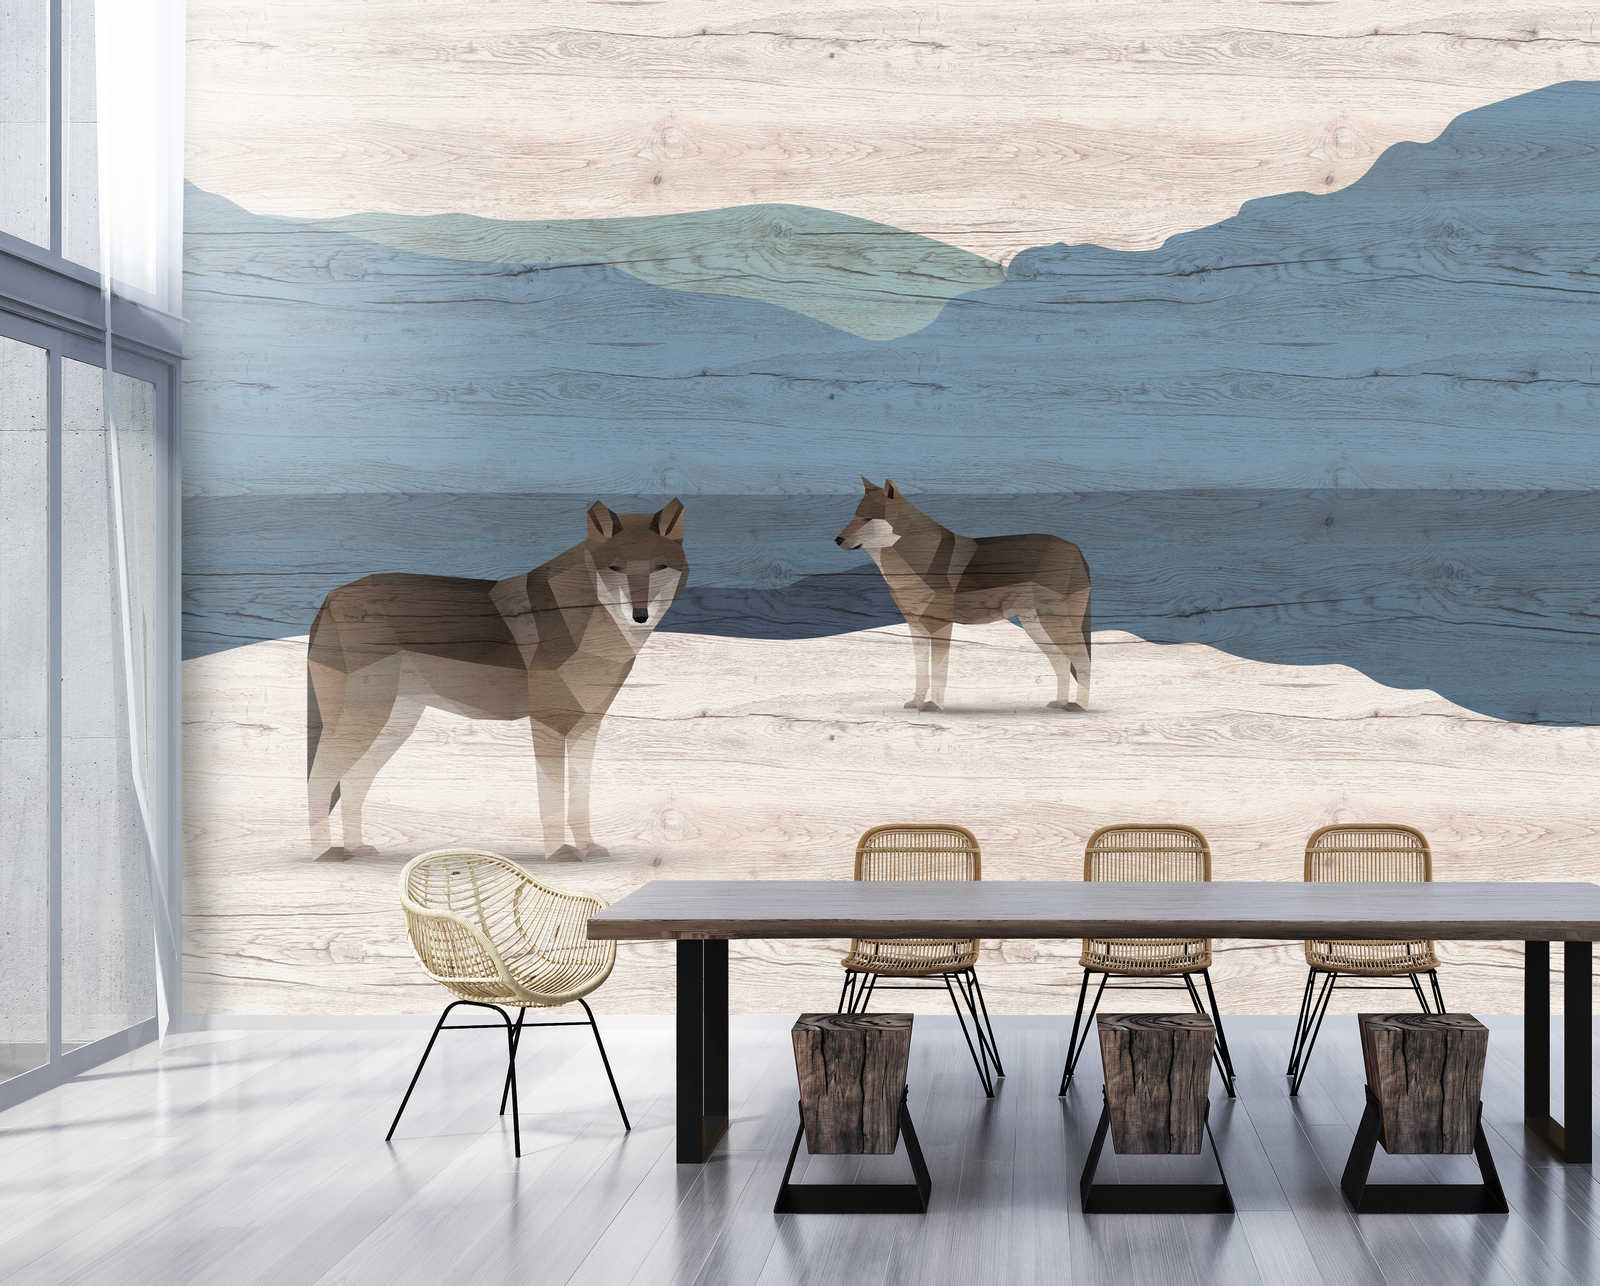             Yukon 1 - mountains & dogs mural with wood texture
        